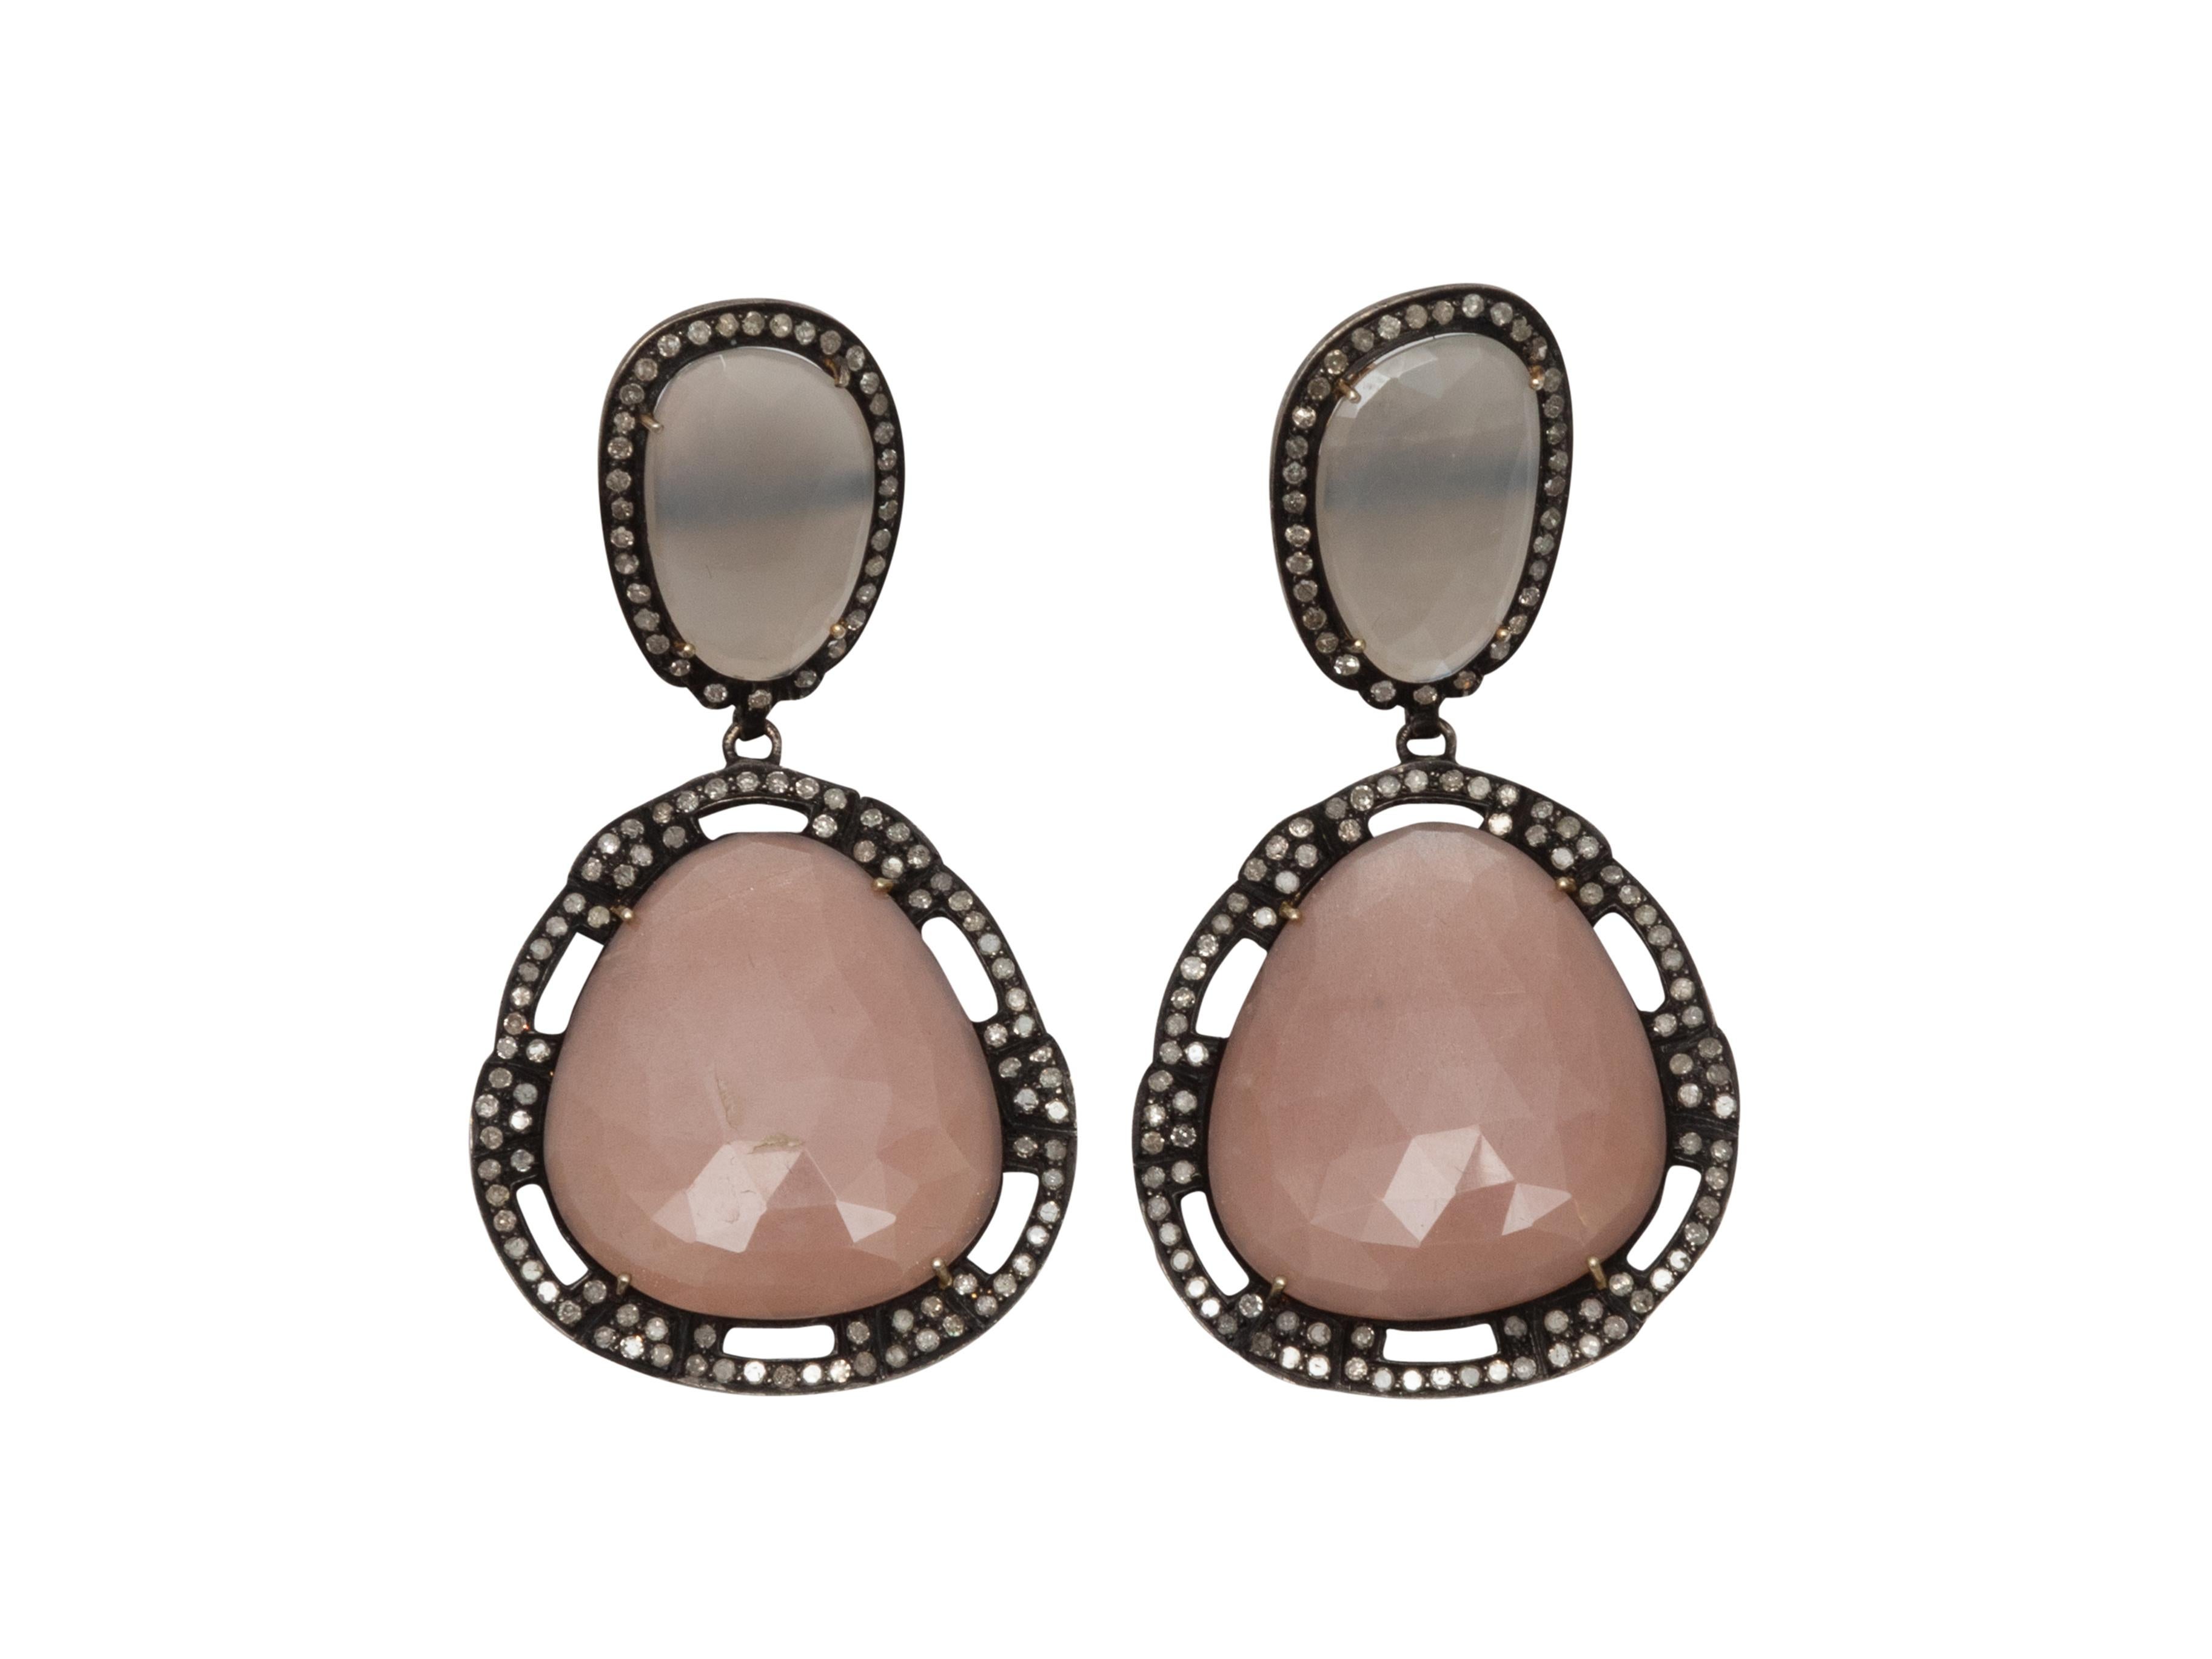 Product Details: Pink gemstone and pave diamond drop earrings by Bavna. 1.5